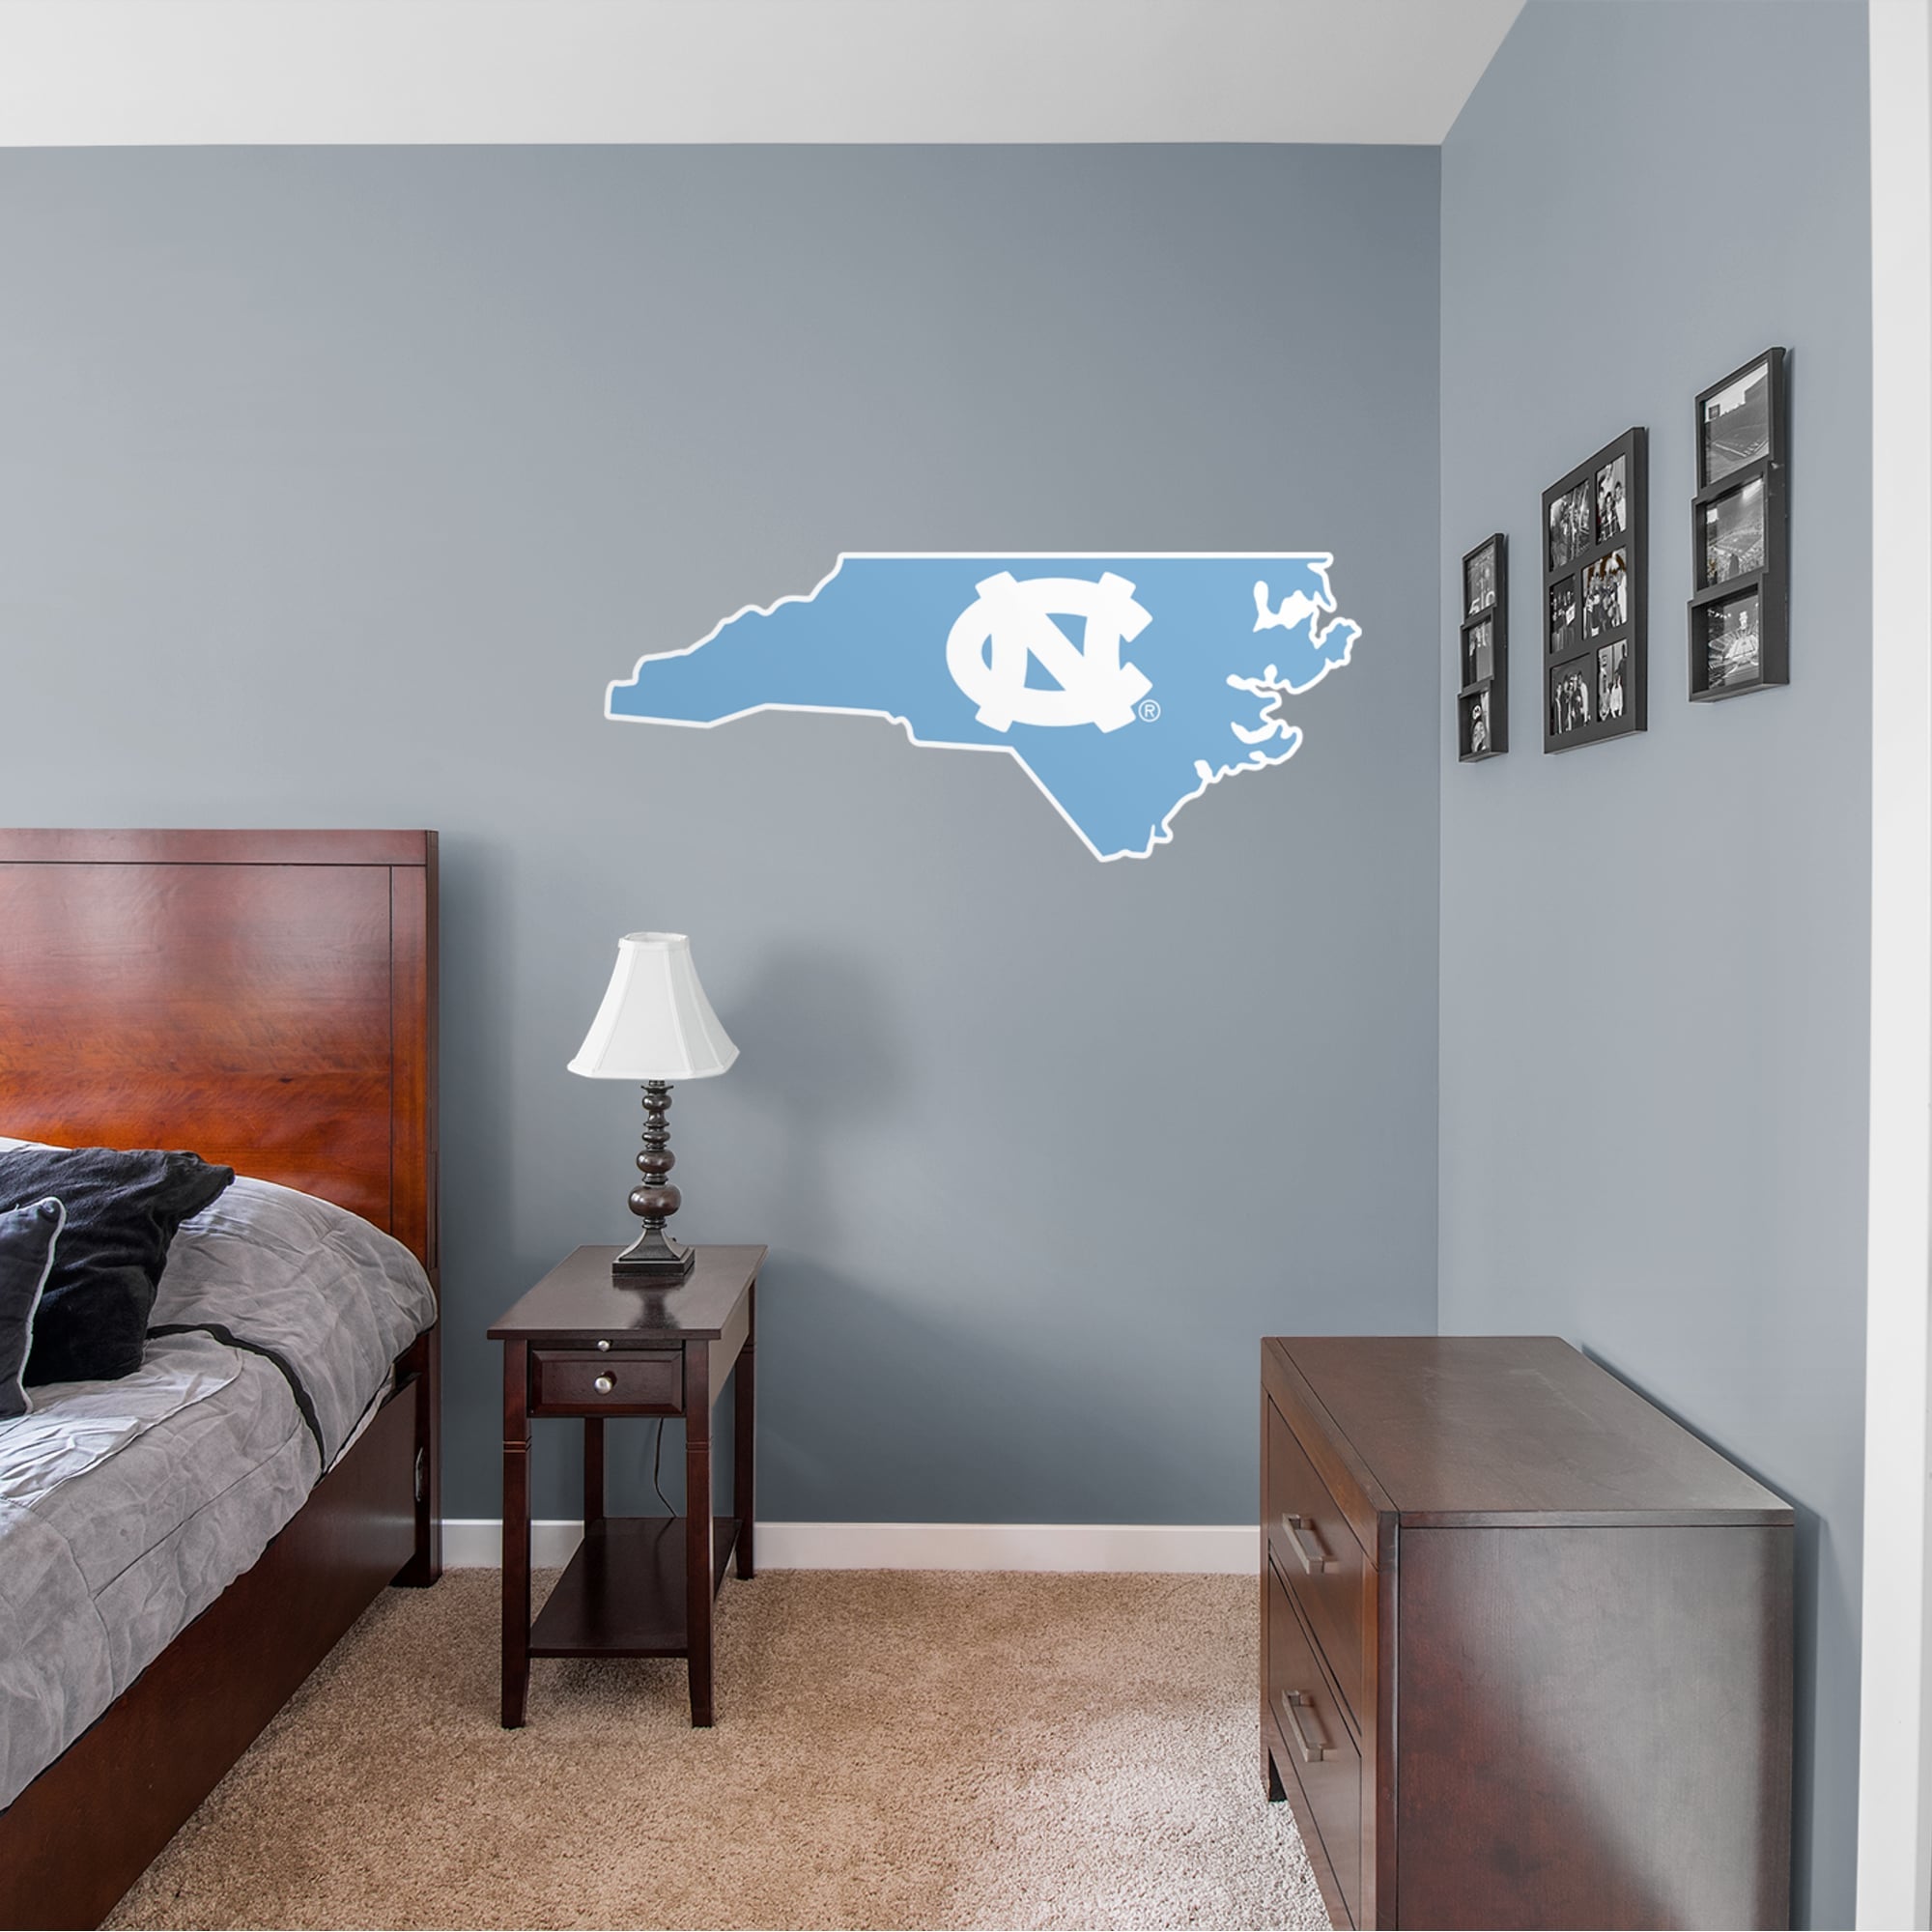 North Carolina Tar Heels: State of North Carolina - Officially Licensed Removable Wall Decal 51.0"W x 21.0"H by Fathead | Vinyl